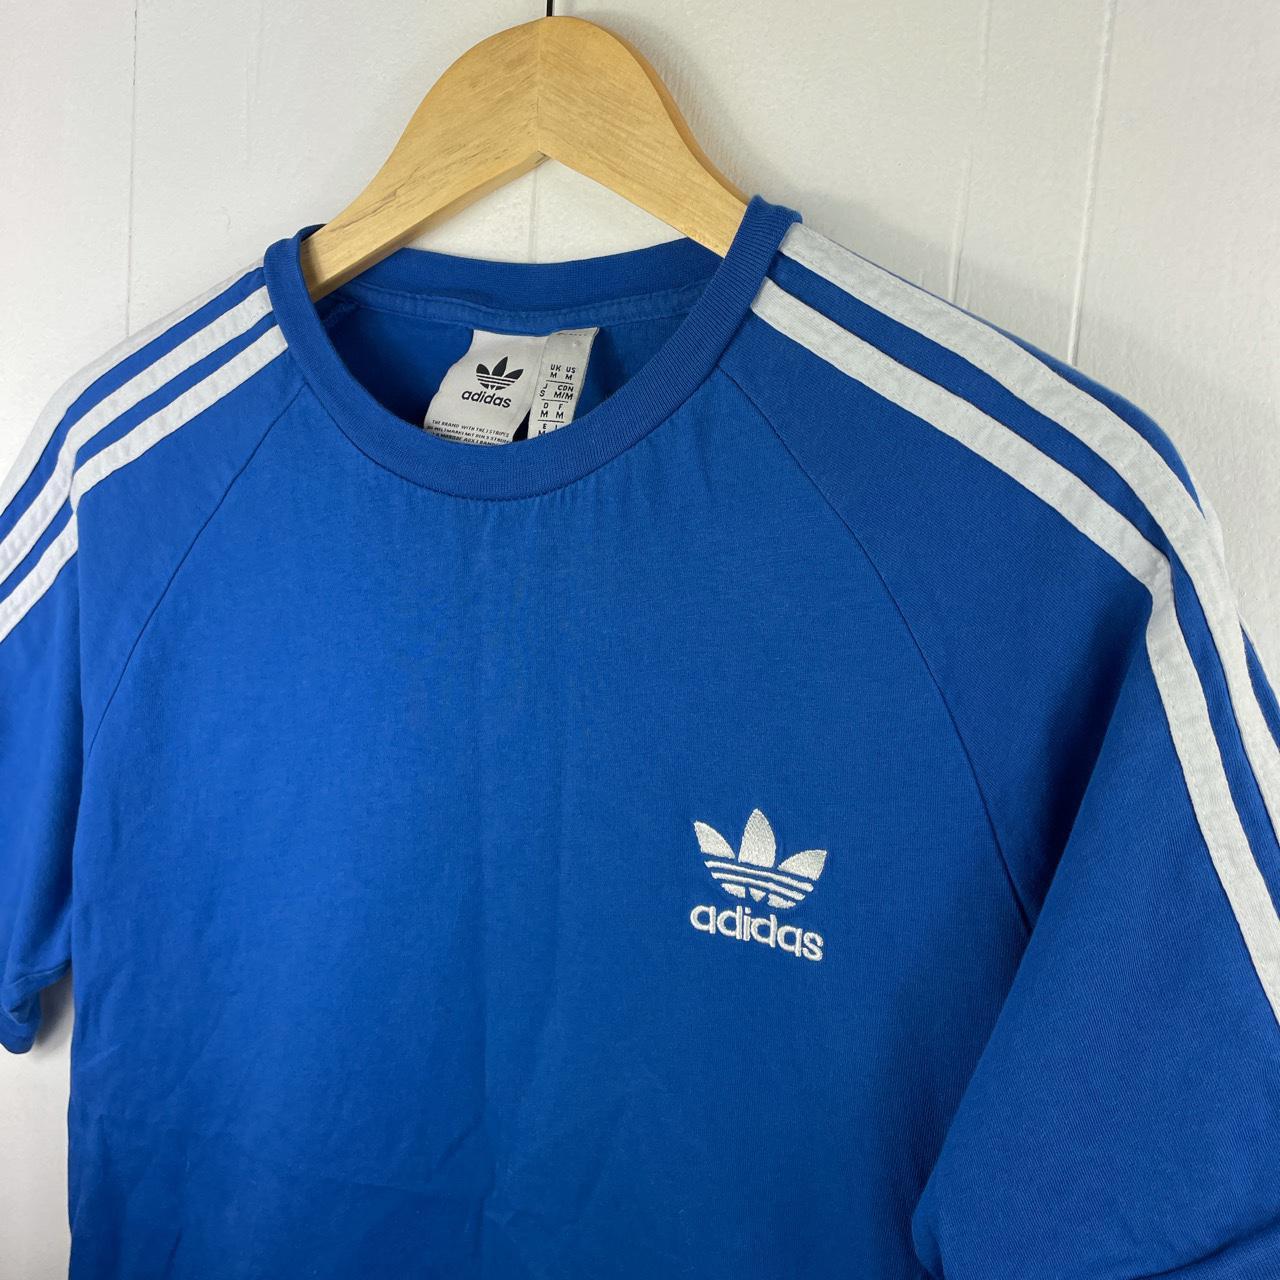 Adidas classic 3-stripe t shirt in bright blue, with... - Depop